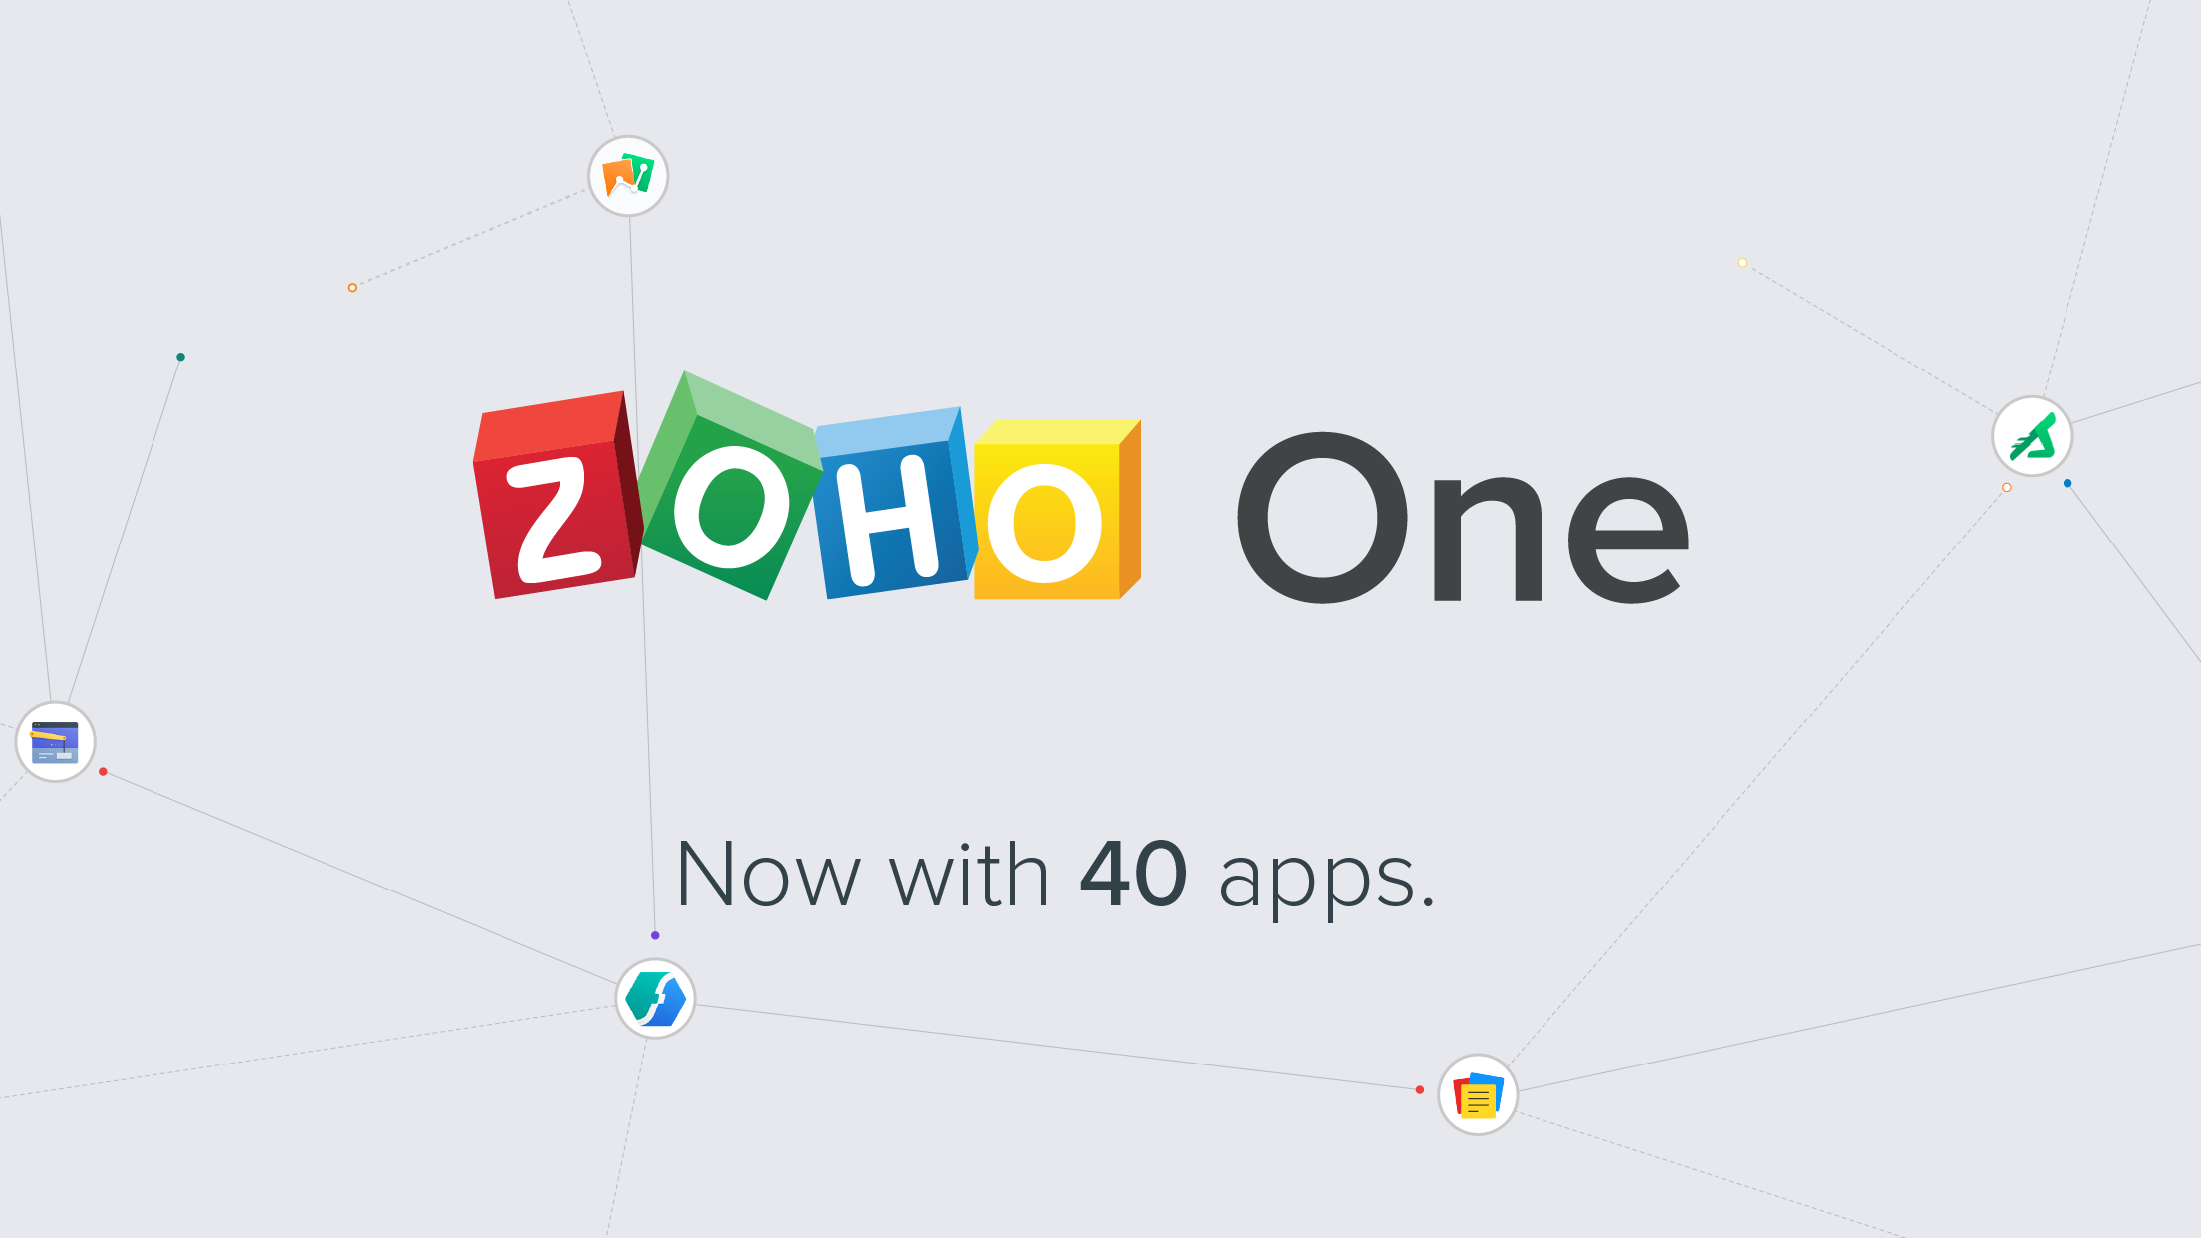 Zoho One: Now with 40 Apps to Run Your Business